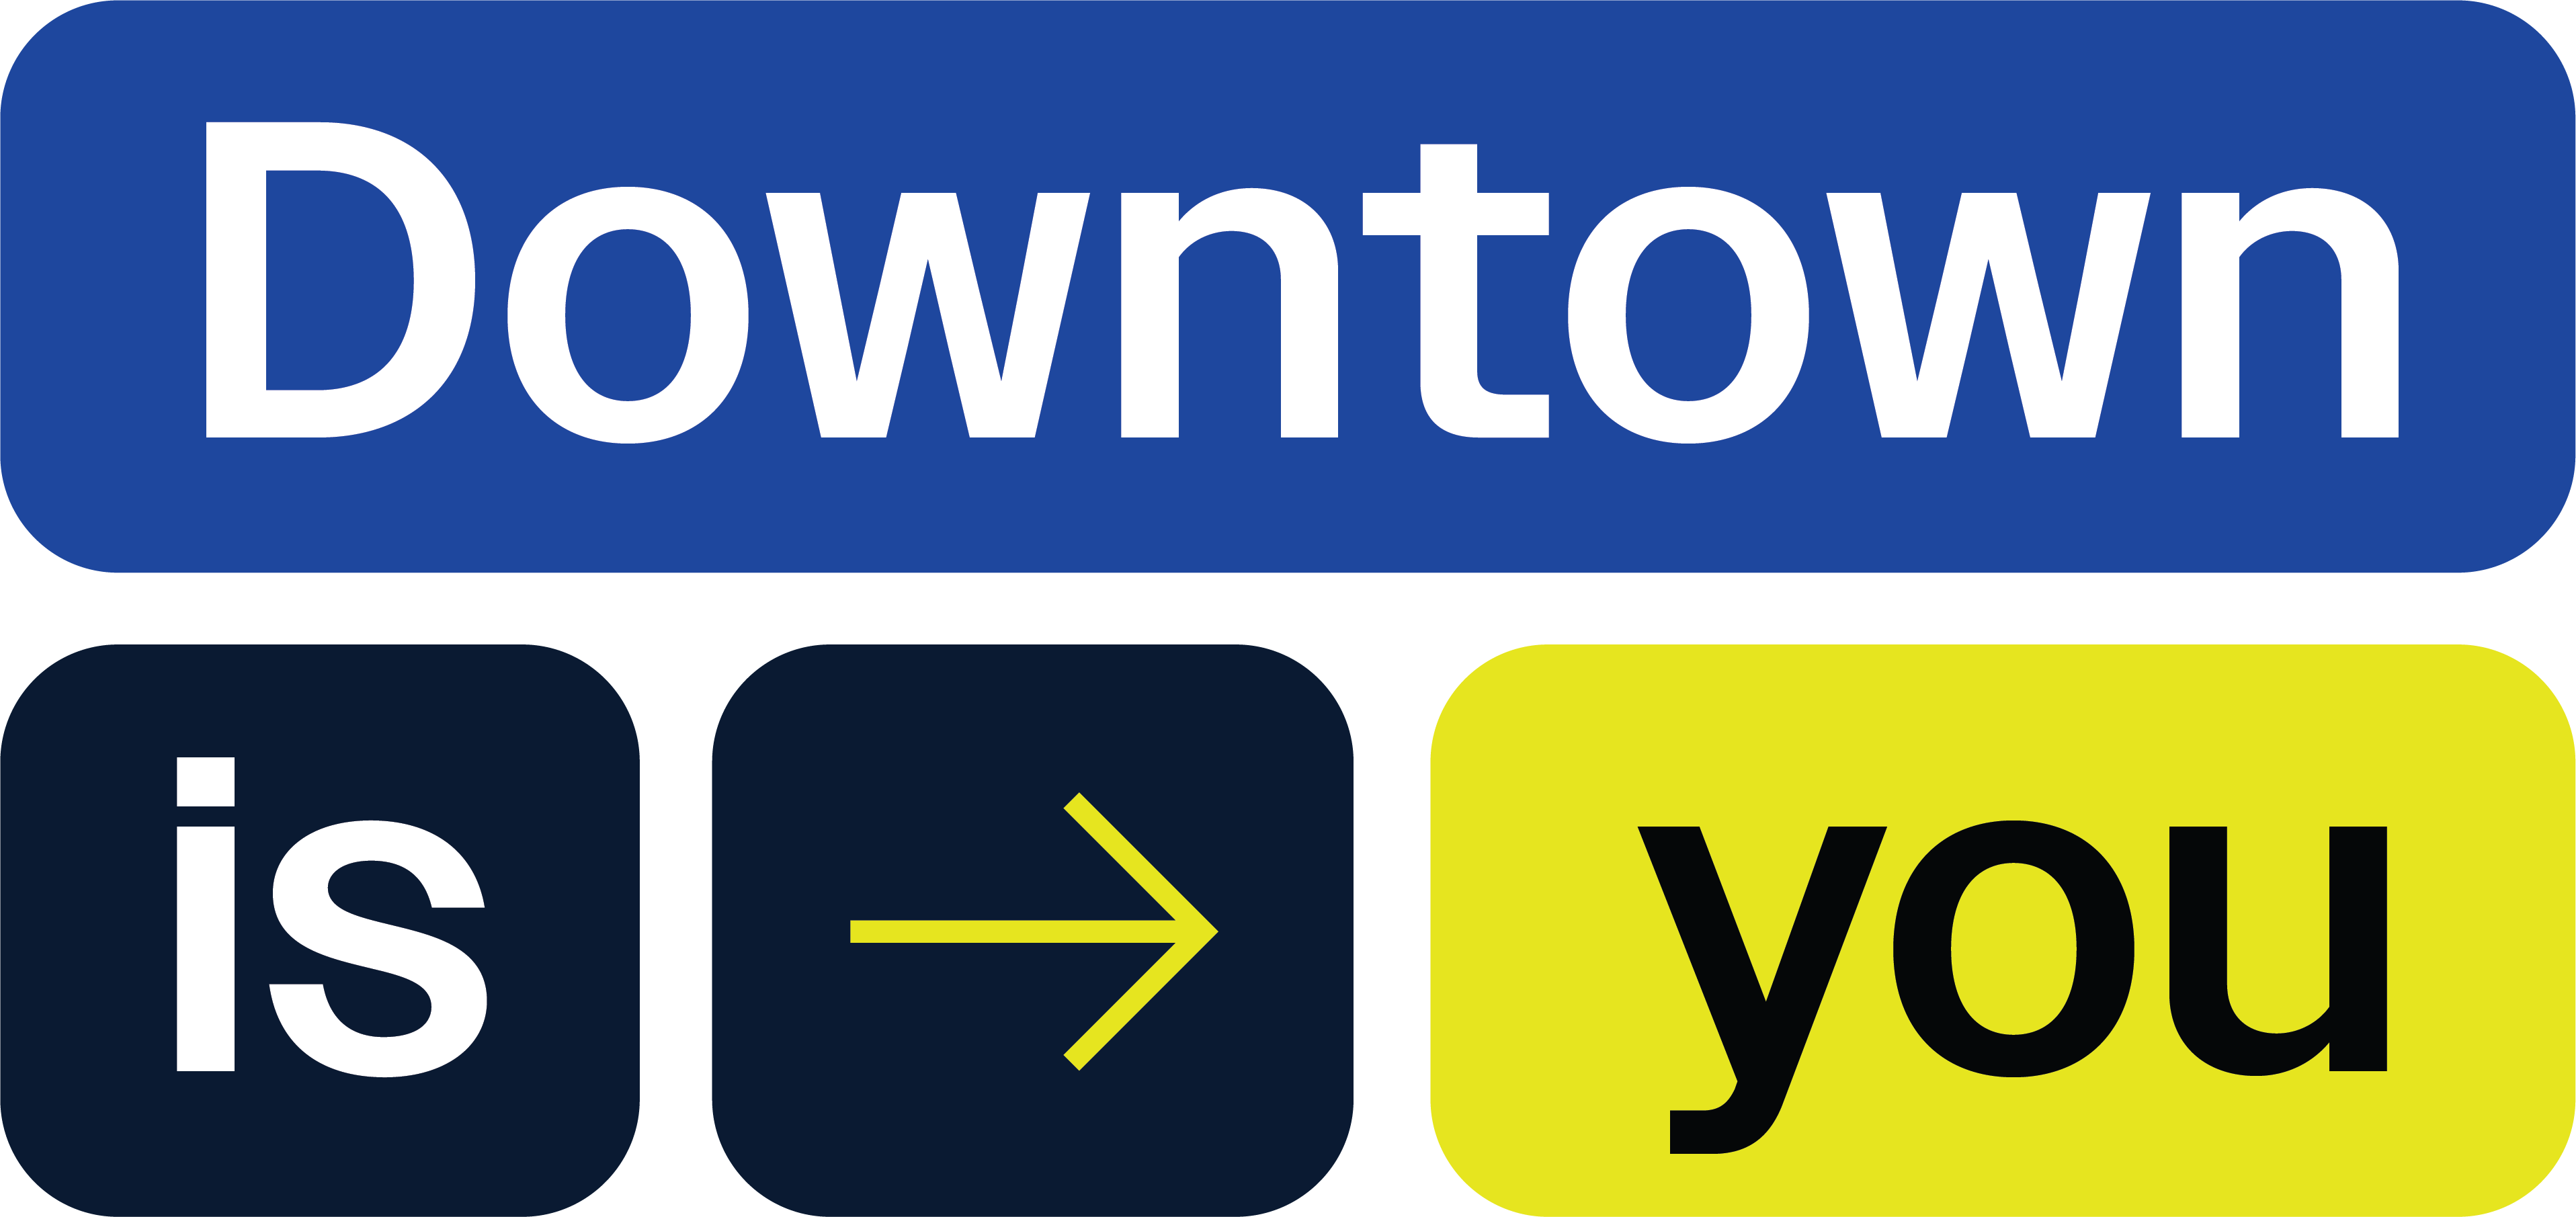 DowntownIsYOU_BLUE.png